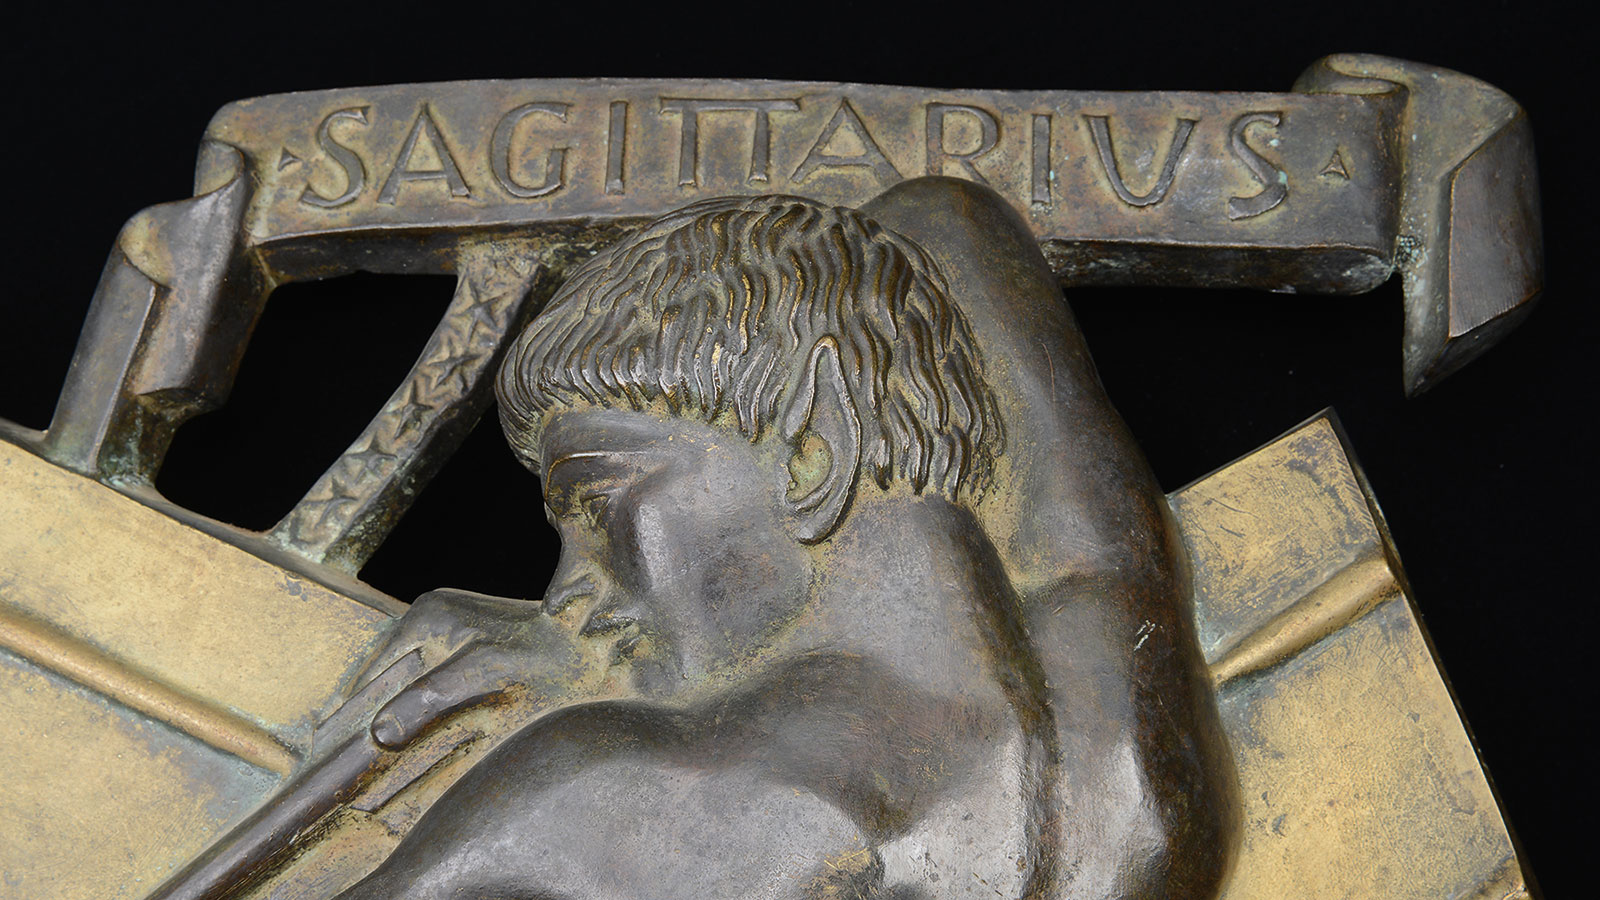 Detail of “Sagittarius” Bronze by Paul Manship, a relief from a model of his work “Celestial Sphere.”